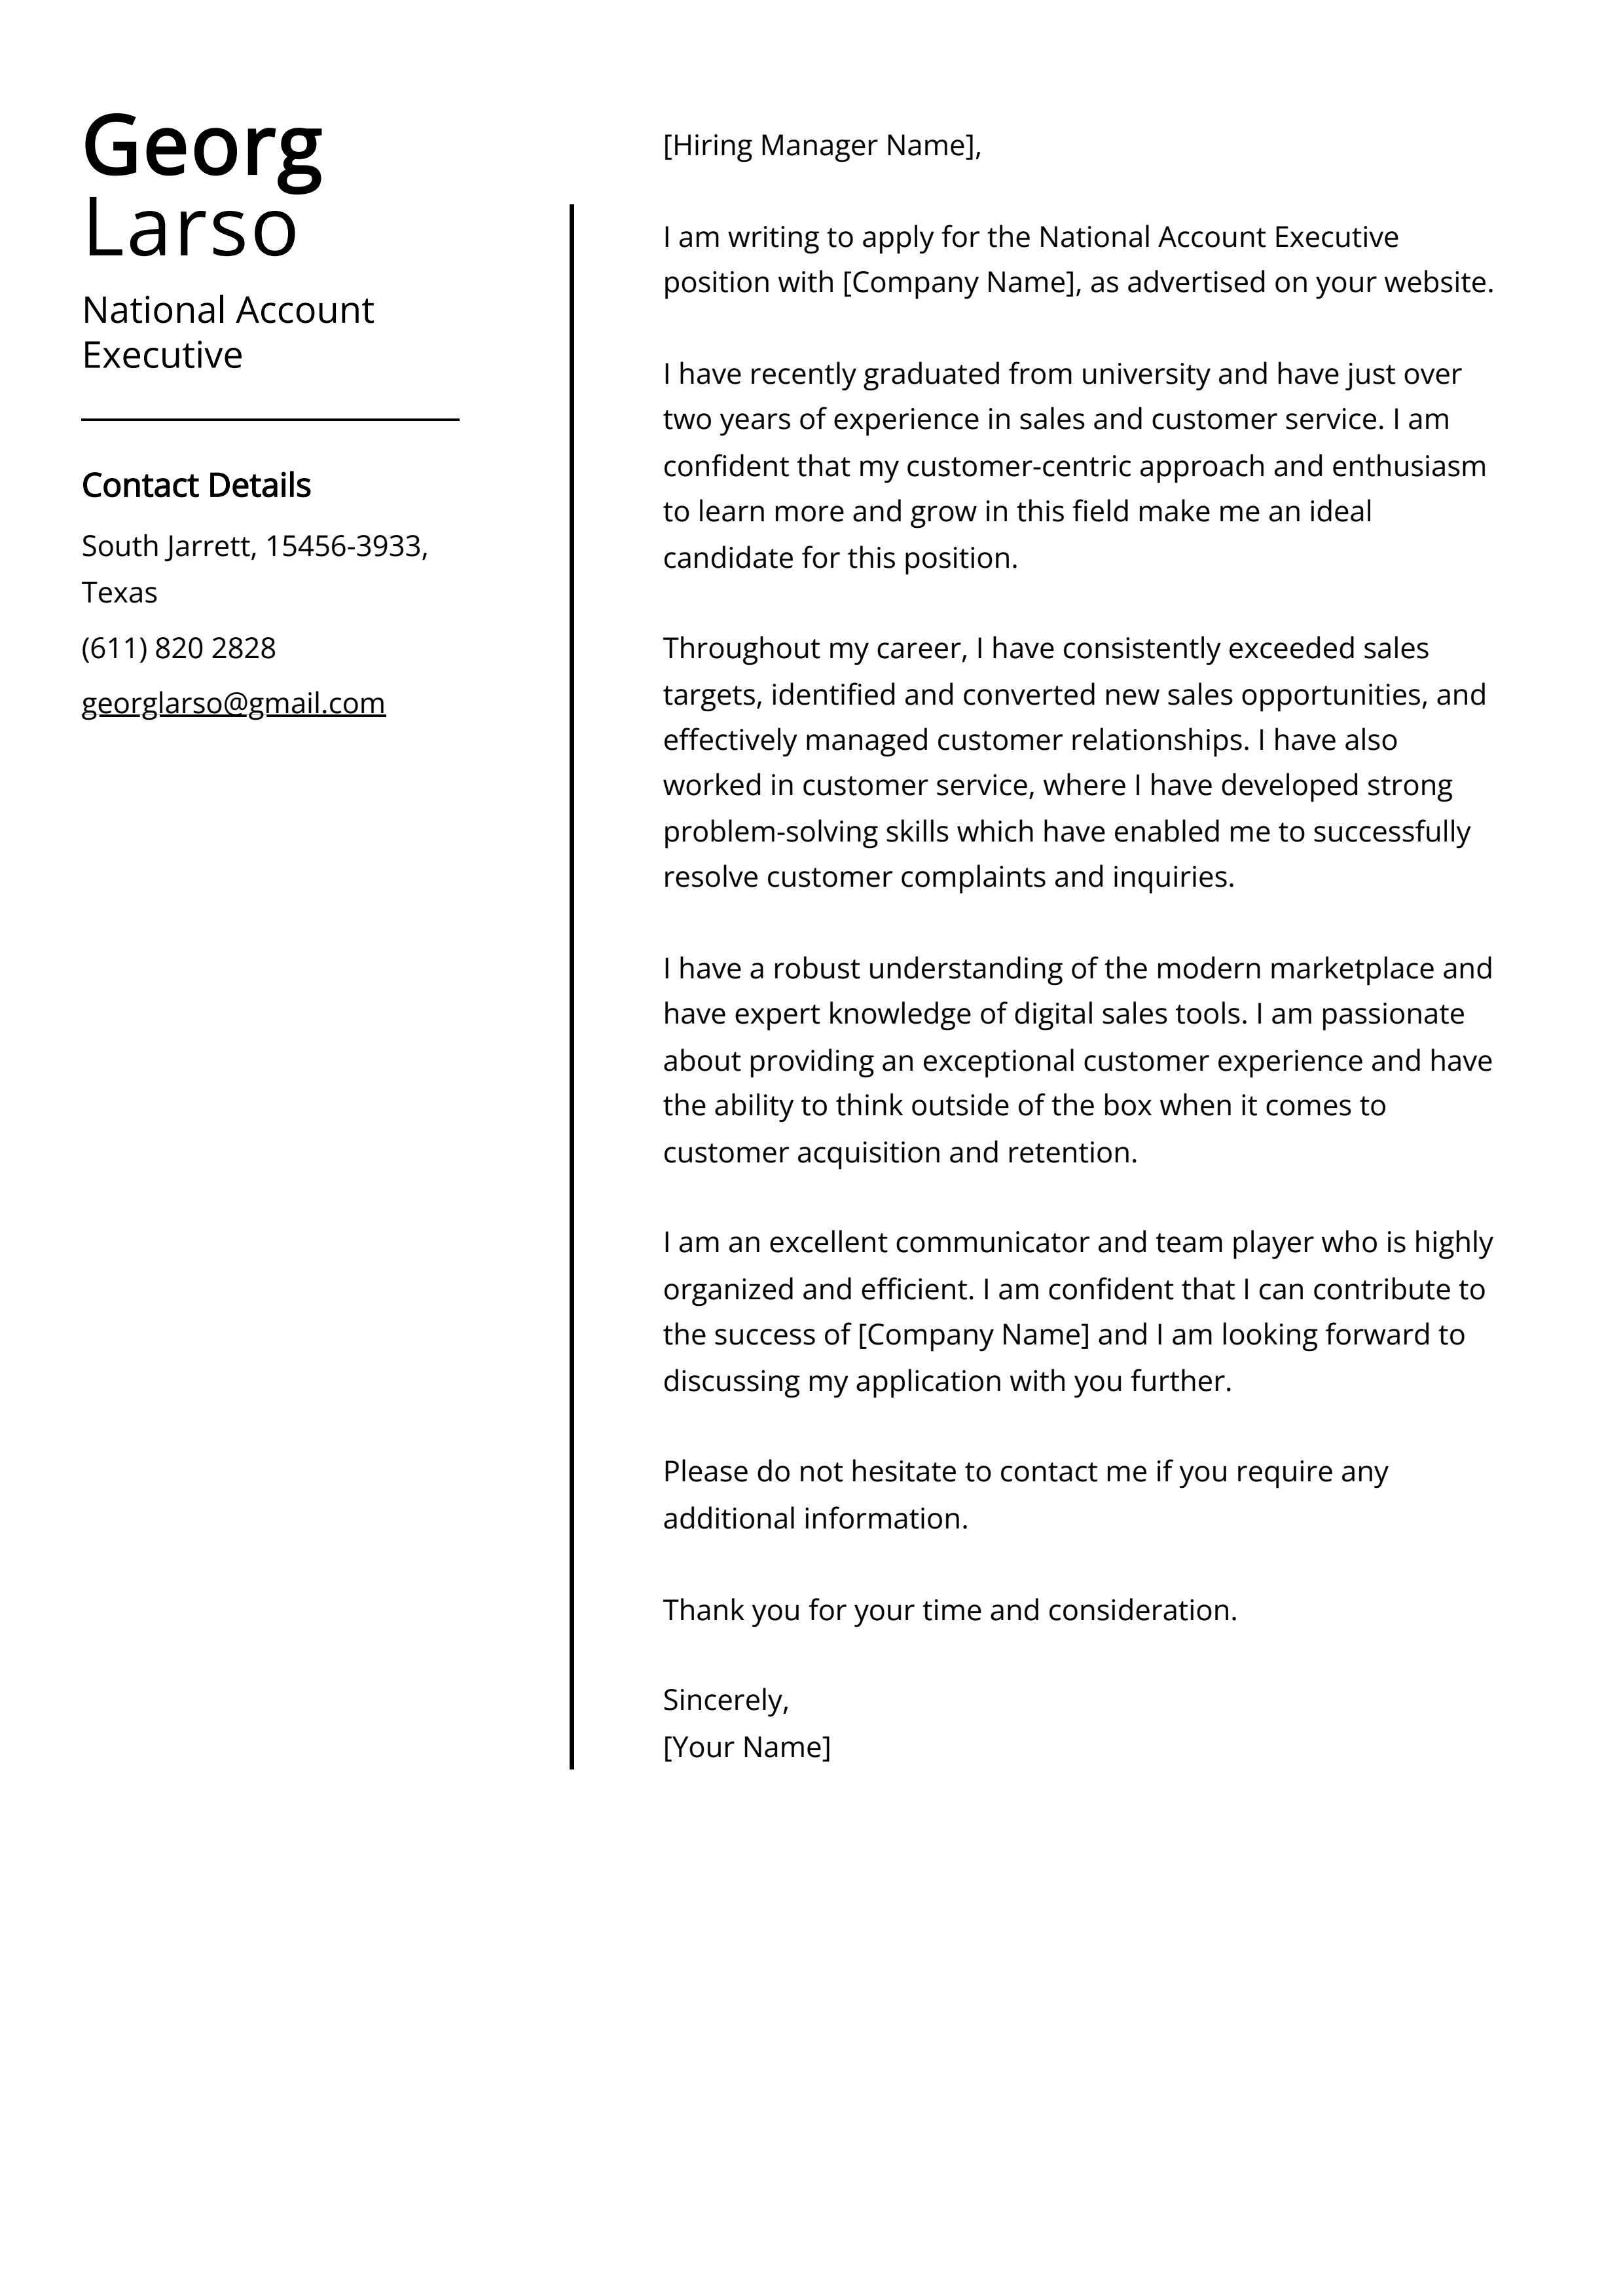 National Account Executive Cover Letter Example